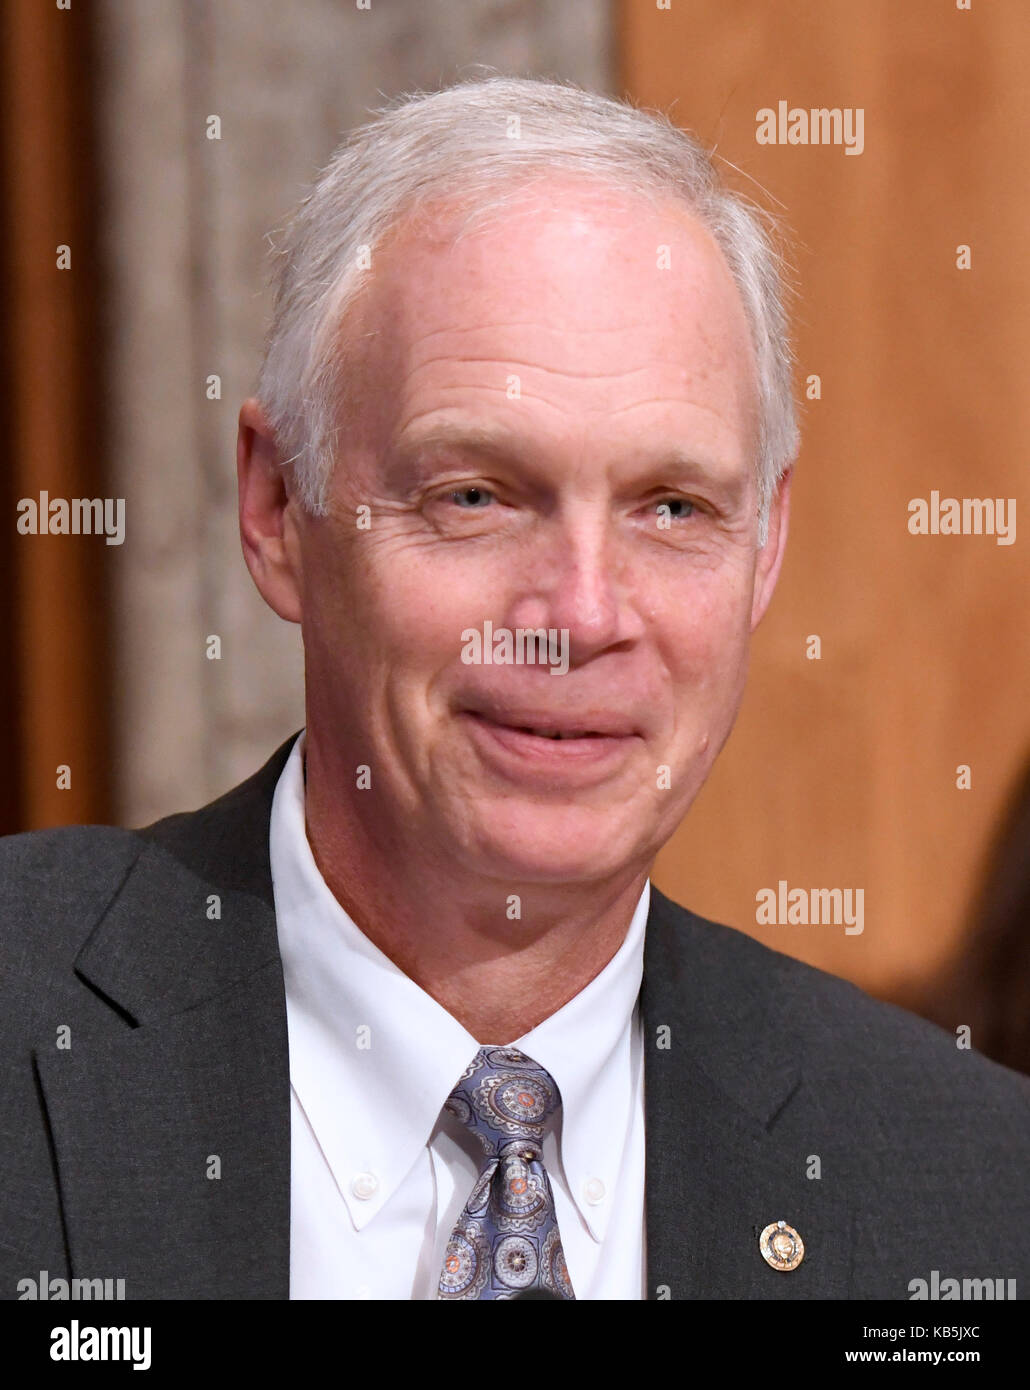 United States Senator Ron Johnson (Republican of Wisconsin), Chairman, United States Senate Committee Homeland Security and Governmental Affairs, arrives to preside over the hearing about 'Threats to the Homeland' on Capitol Hill in Washington, DC on Wednesday, September 27, 2017. Credit: Ron Sachs / CNP  - NO WIRE SERVICE - Photo: Ron Sachs/Consolidated/dpa Stock Photo